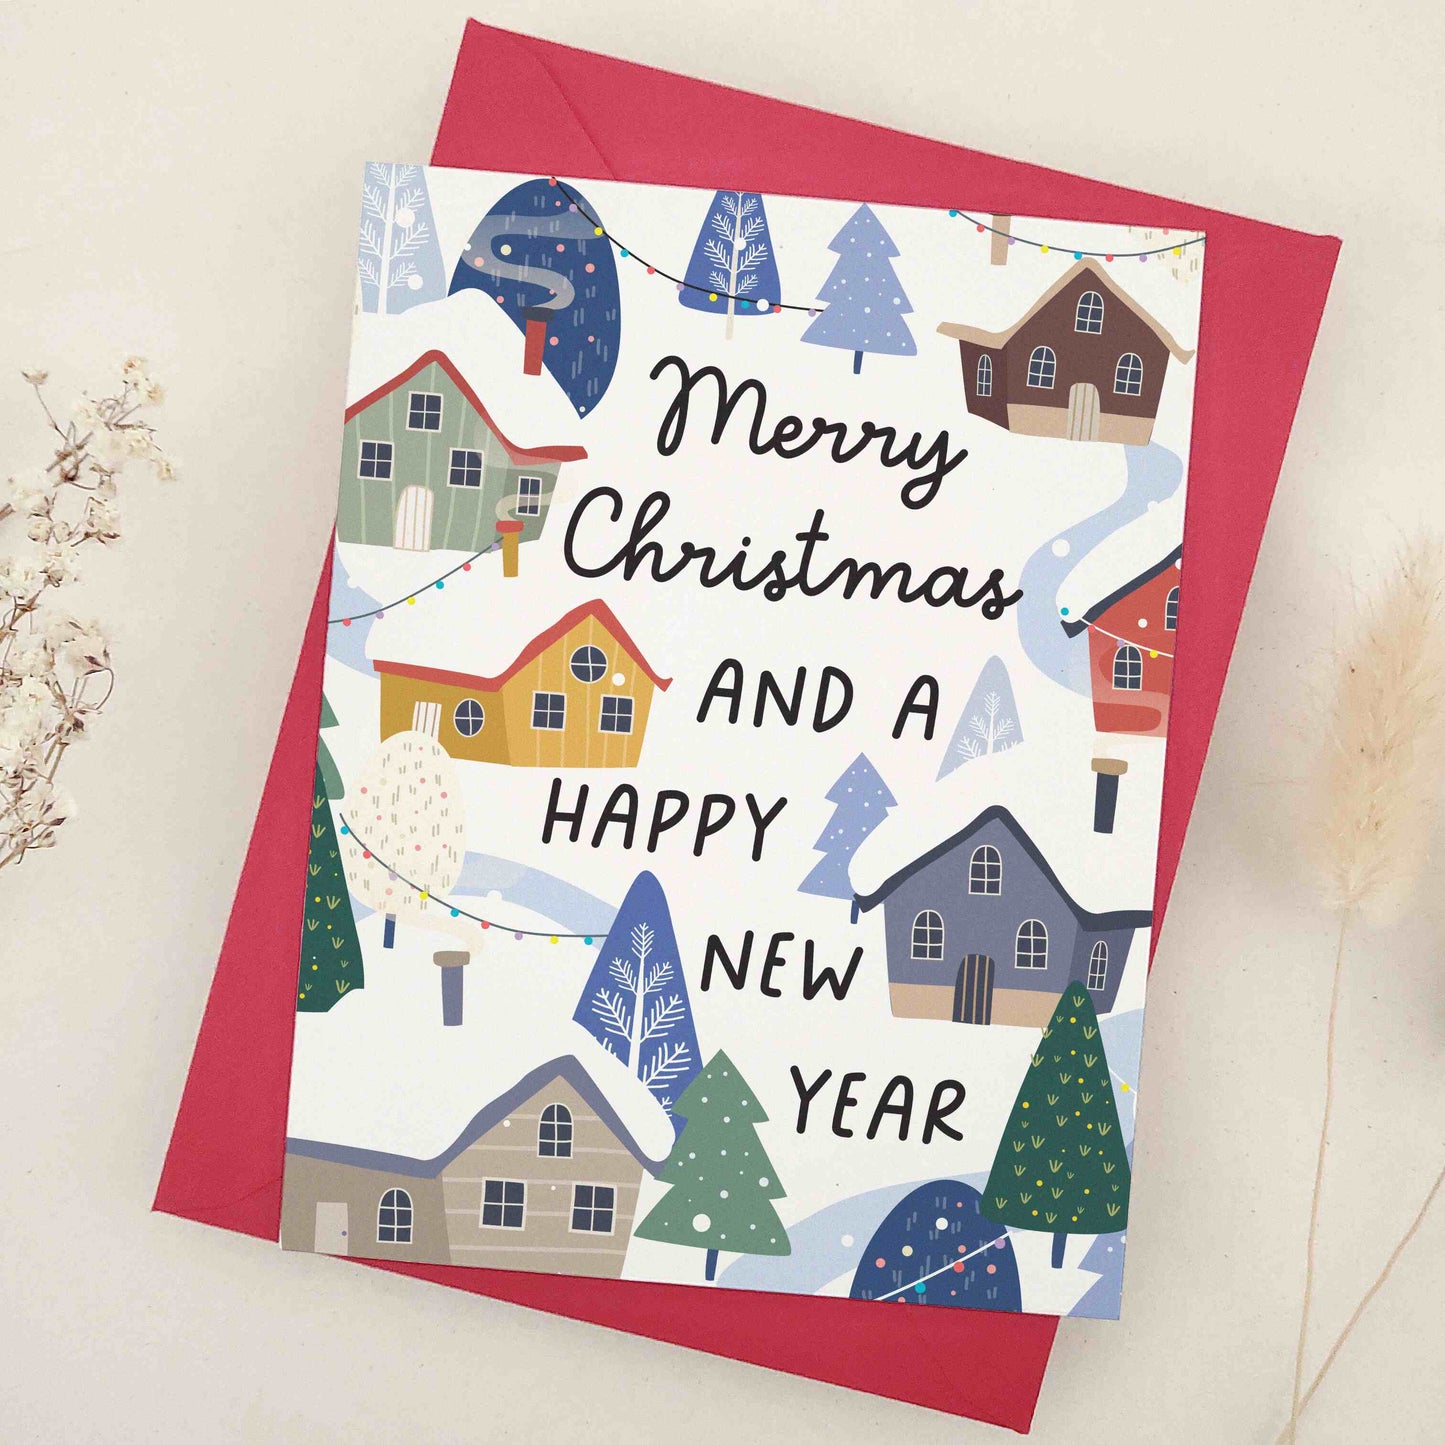 Elegant 'Merry Christmas and a Happy New Year' card depicting a cozy winter scene with snow-covered houses and festive decorations. The design vividly captures the serene and joyous atmosphere of the holiday season, highlighting the warmth and charm of winter celebrations, ideal for sharing heartfelt season's greetings and best wishes.